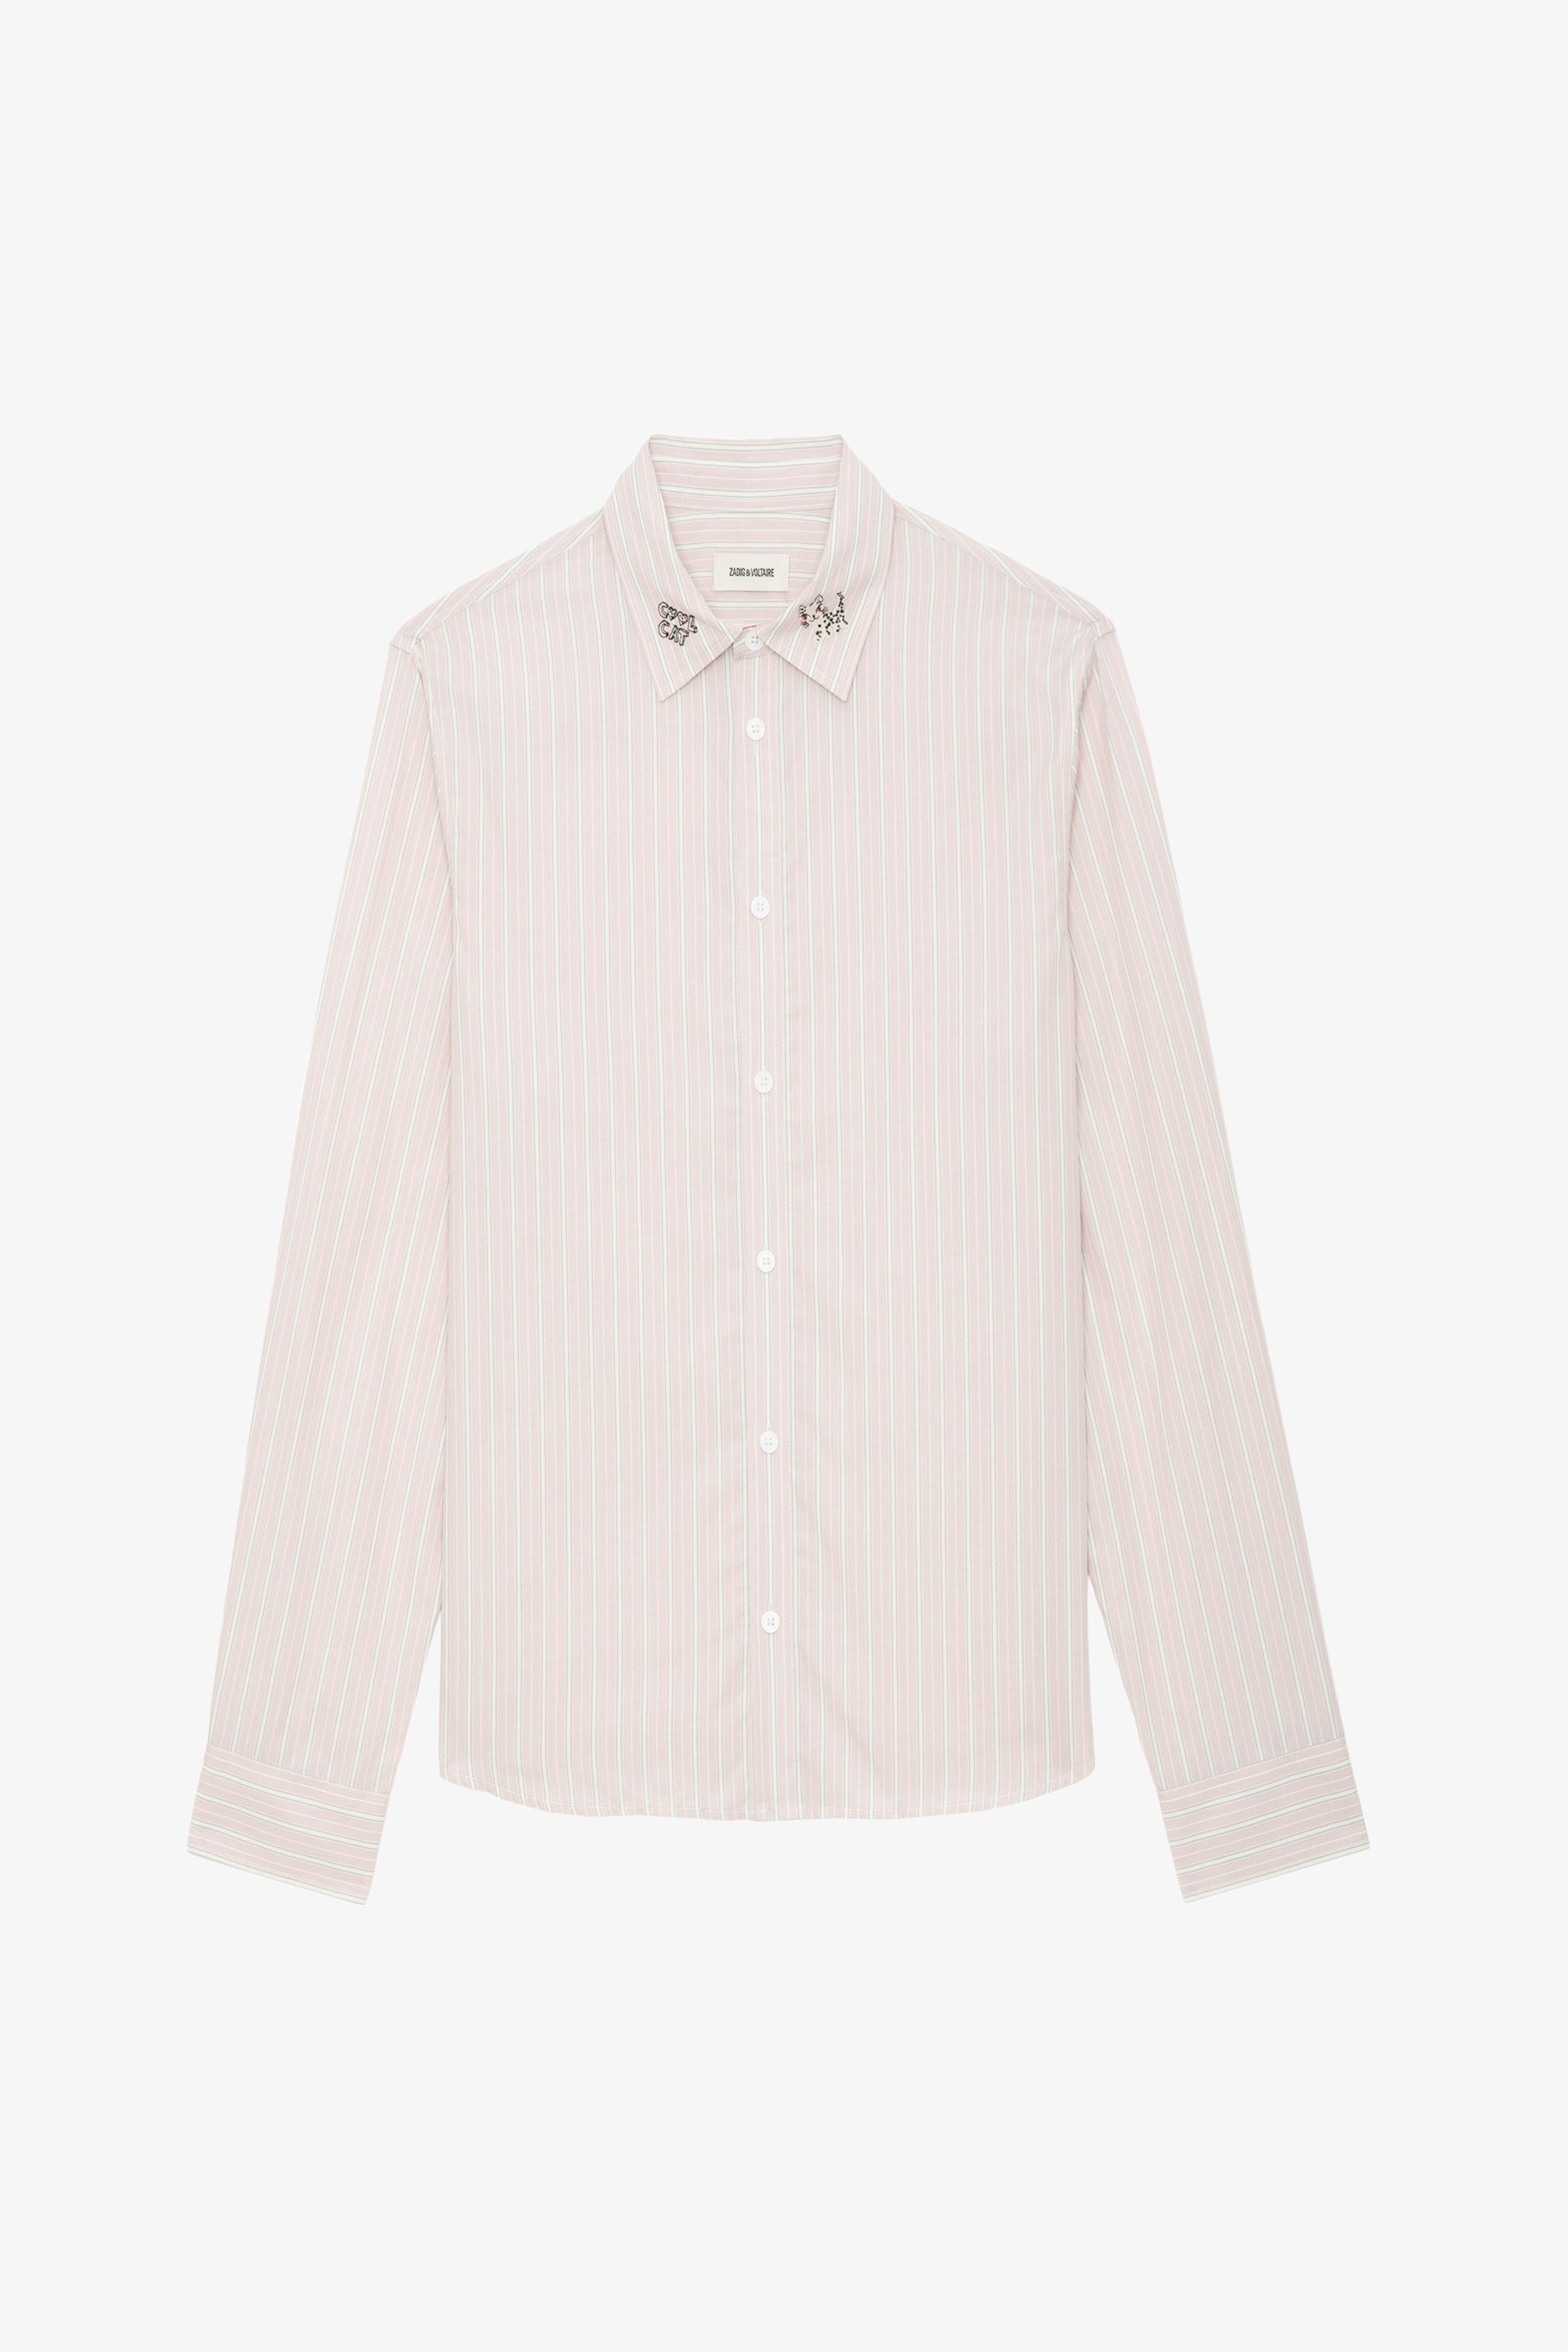 Sydna Shirt - Pale pink cotton long-sleeved shirt with stripes and customised details designed by Humberto Cruz.